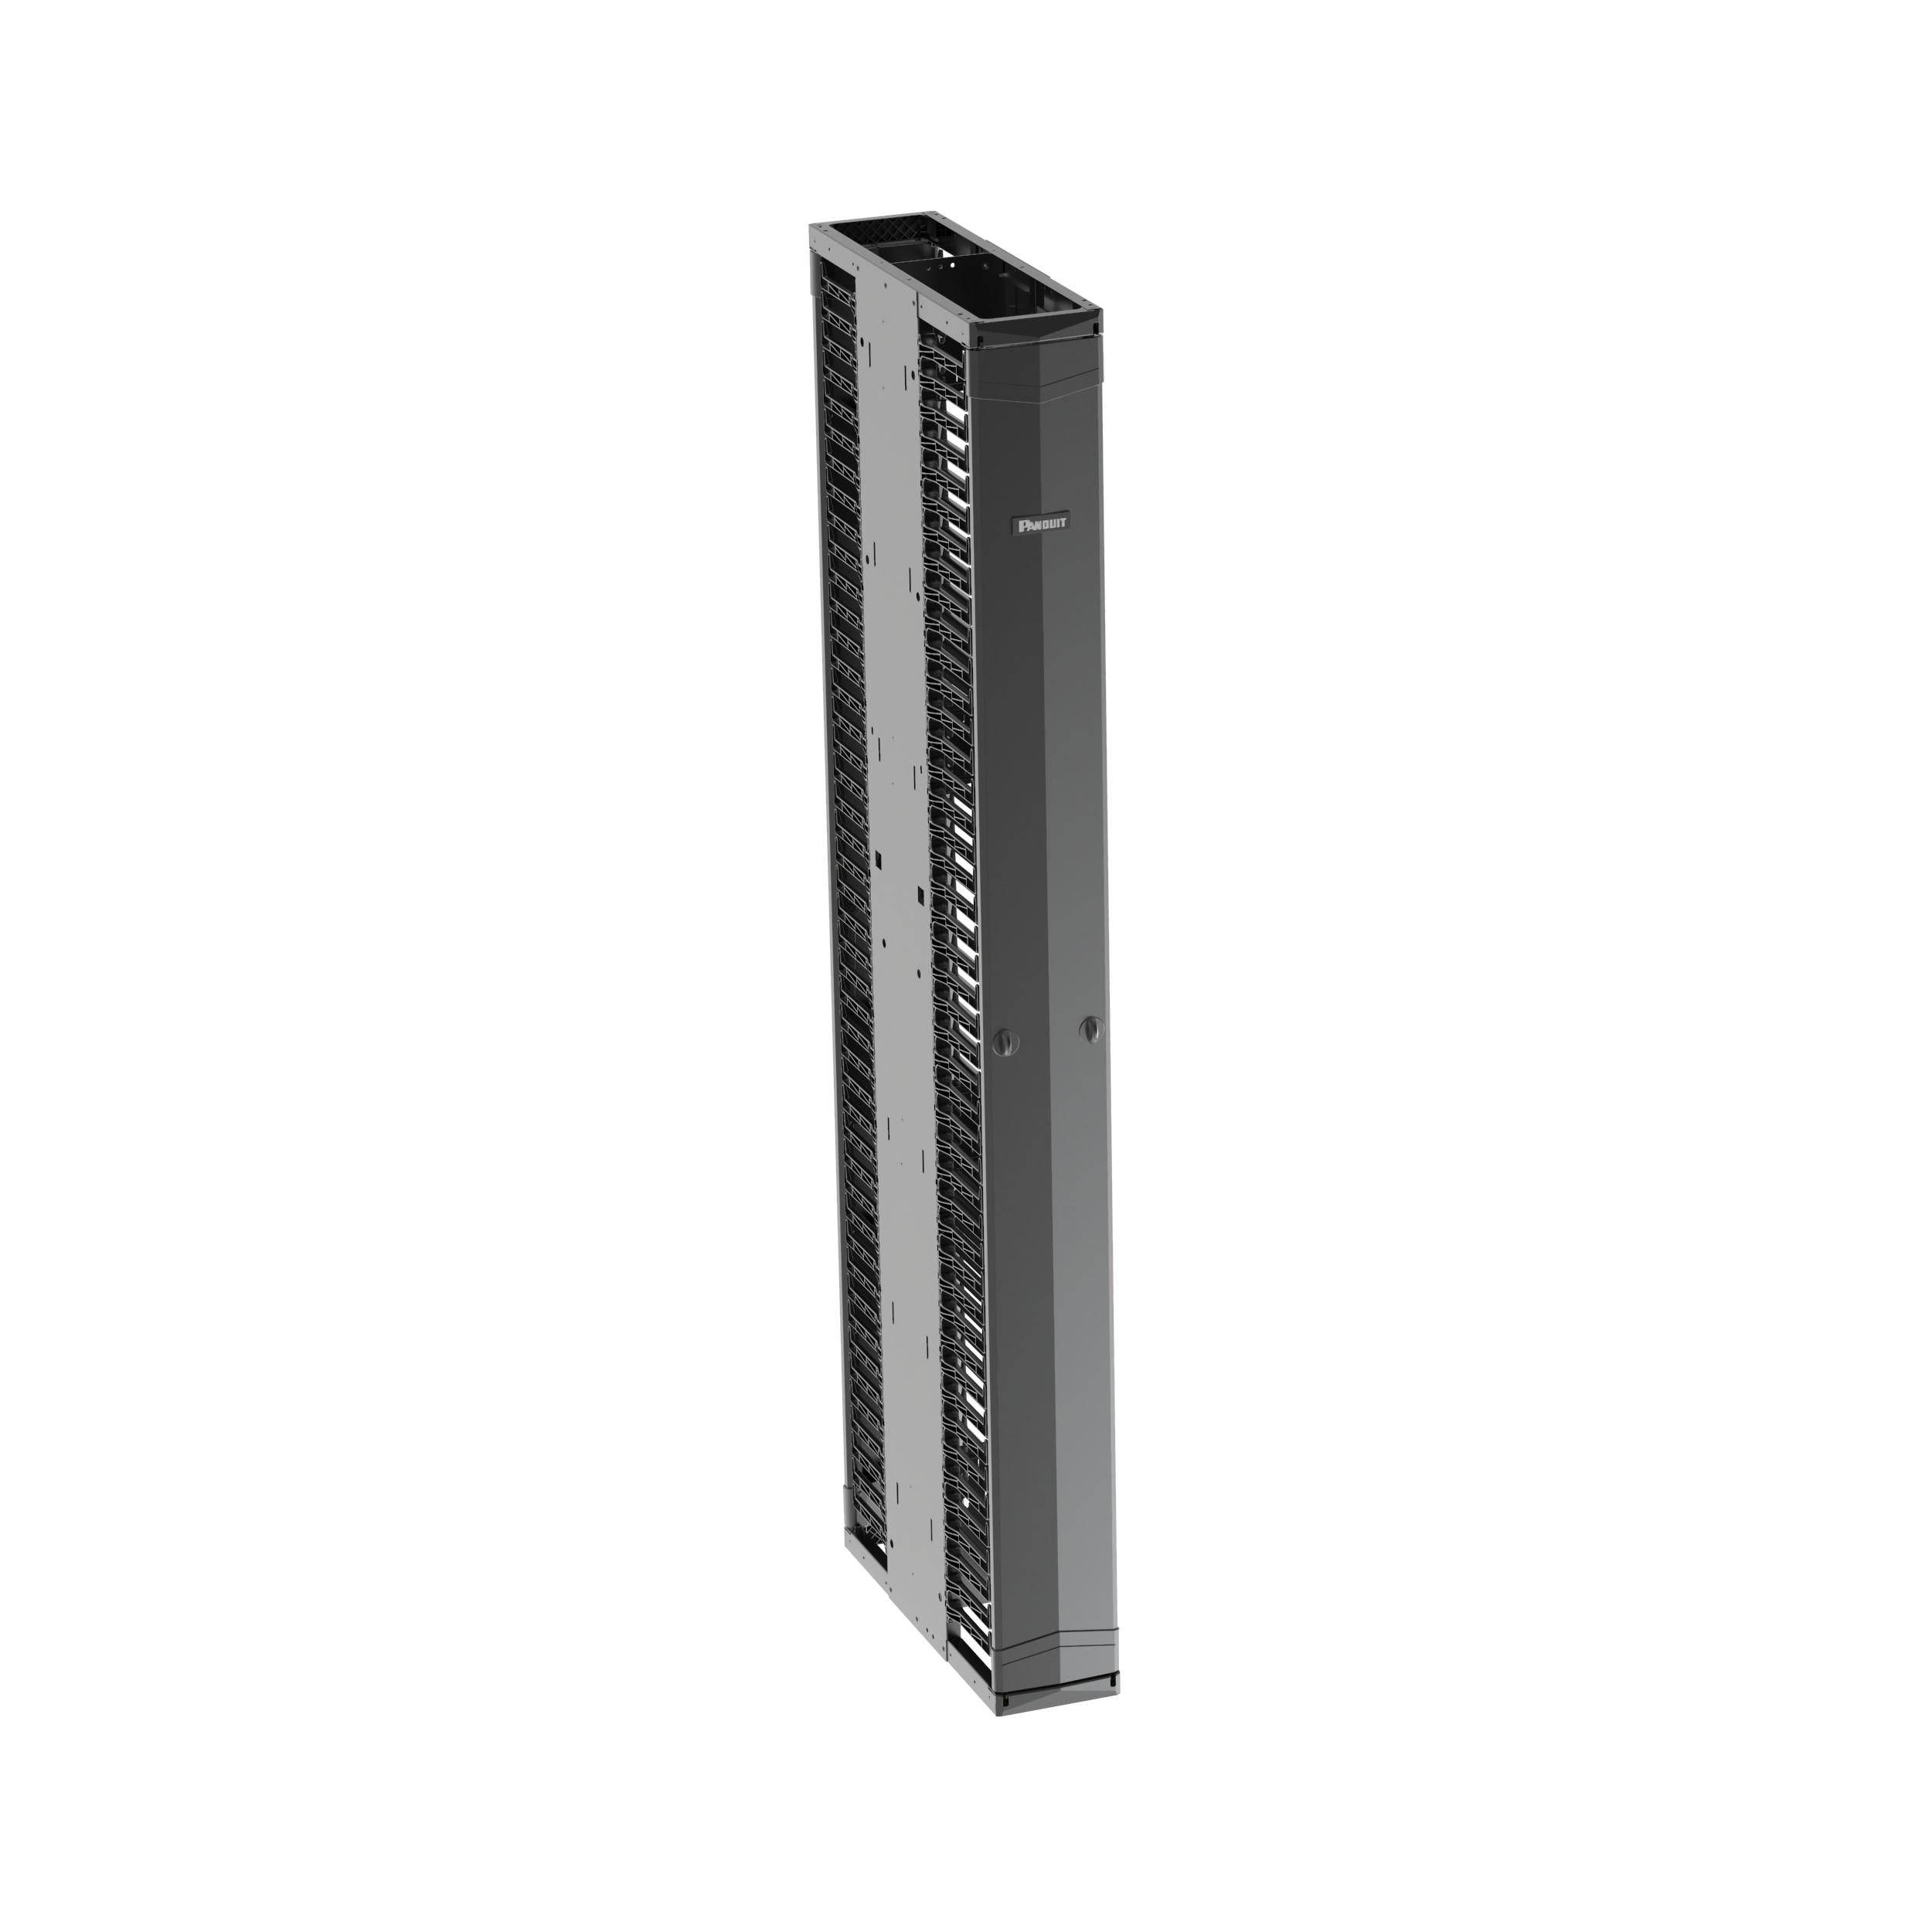 Panduit PE2VD06 PatchRunner™ 2 Enhanced Vertical Cable Manager, BL